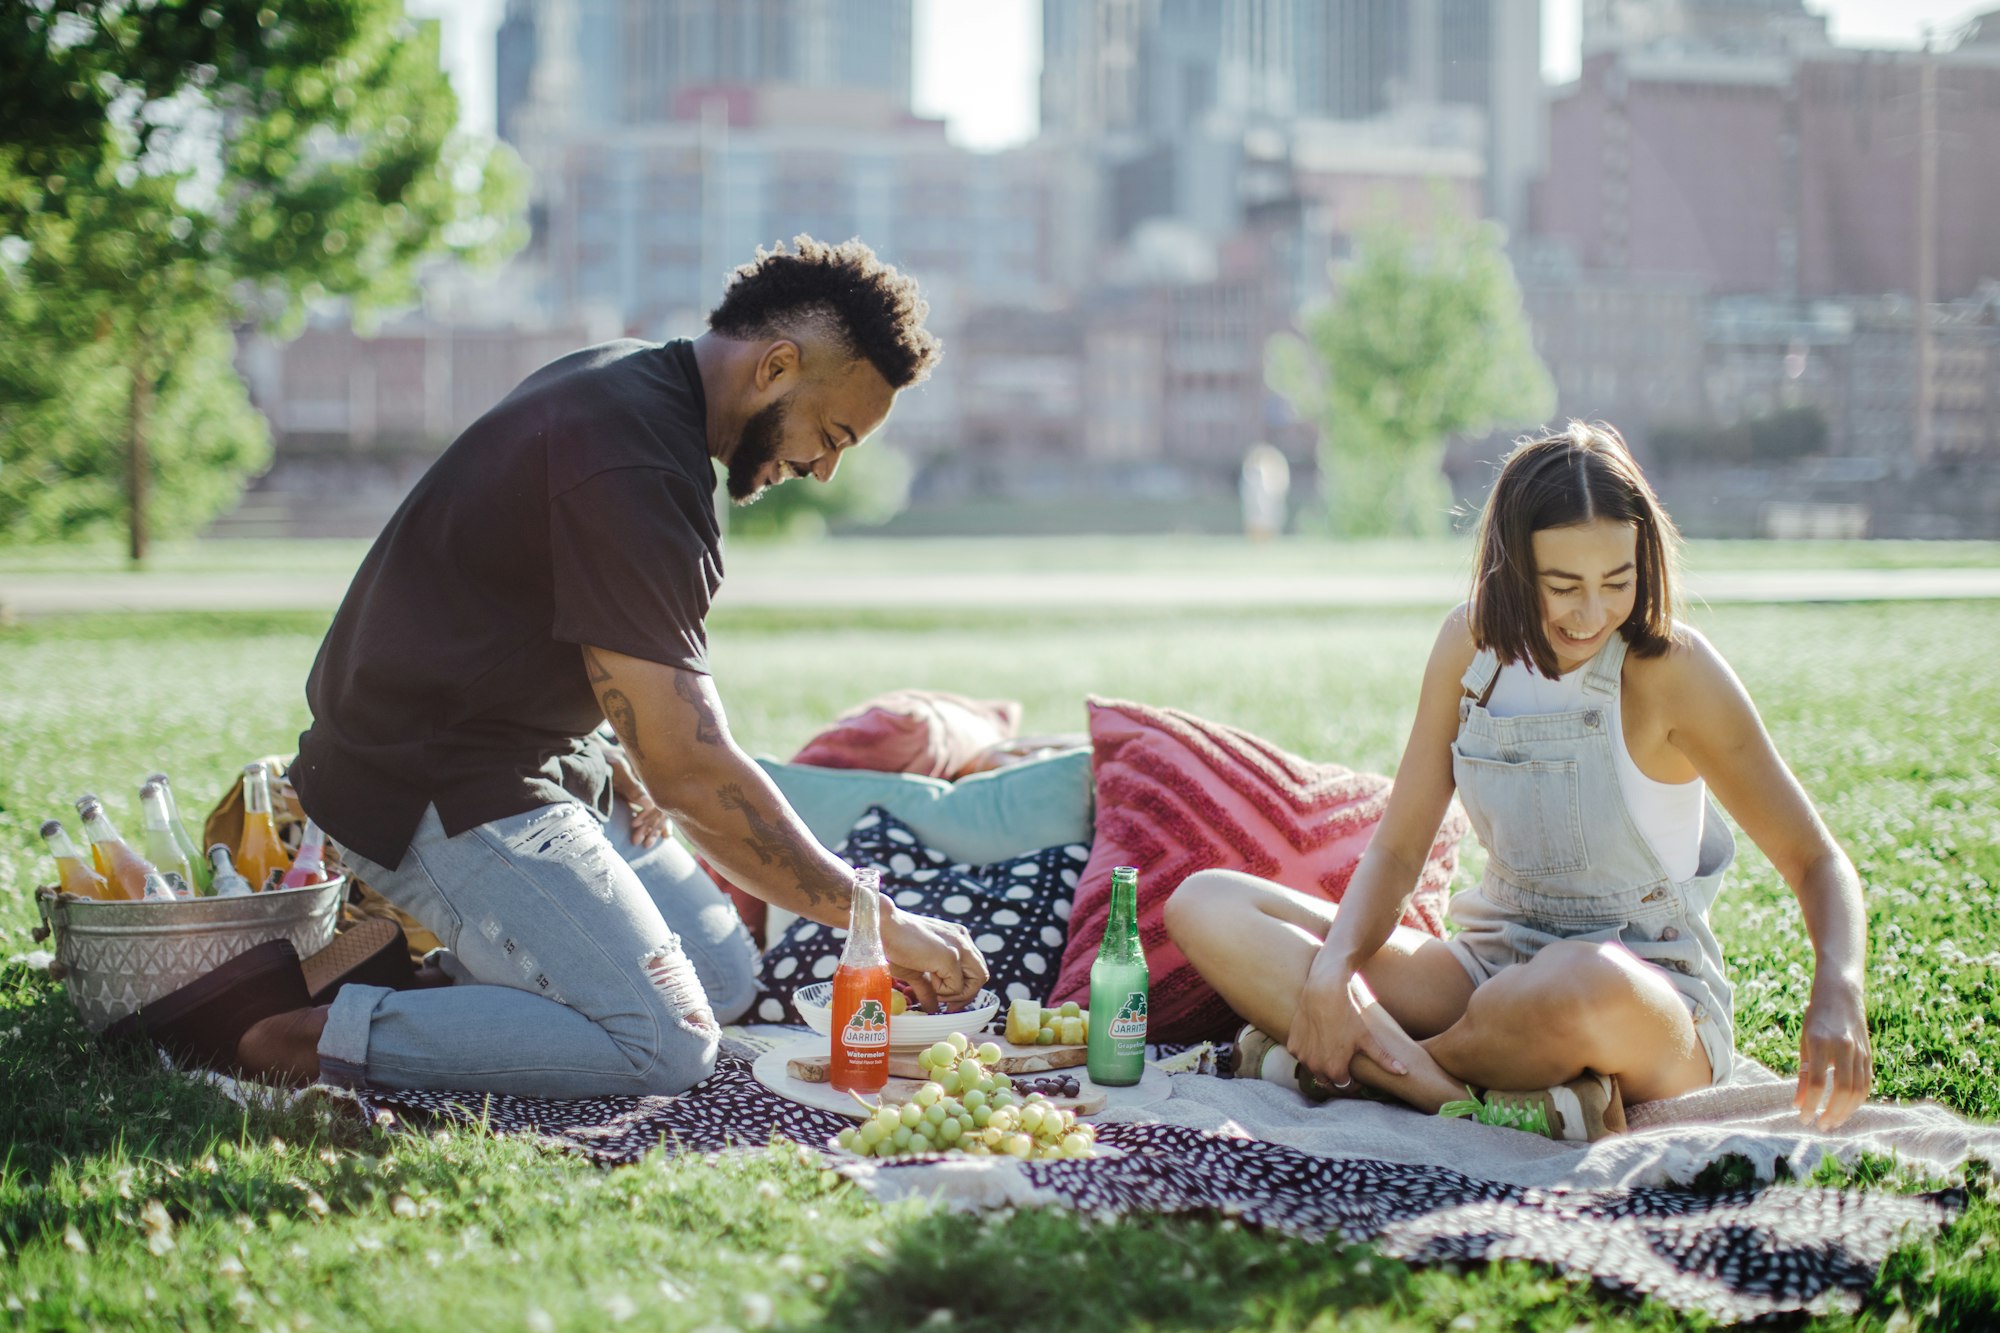 Two people enjoying a picnic at the park